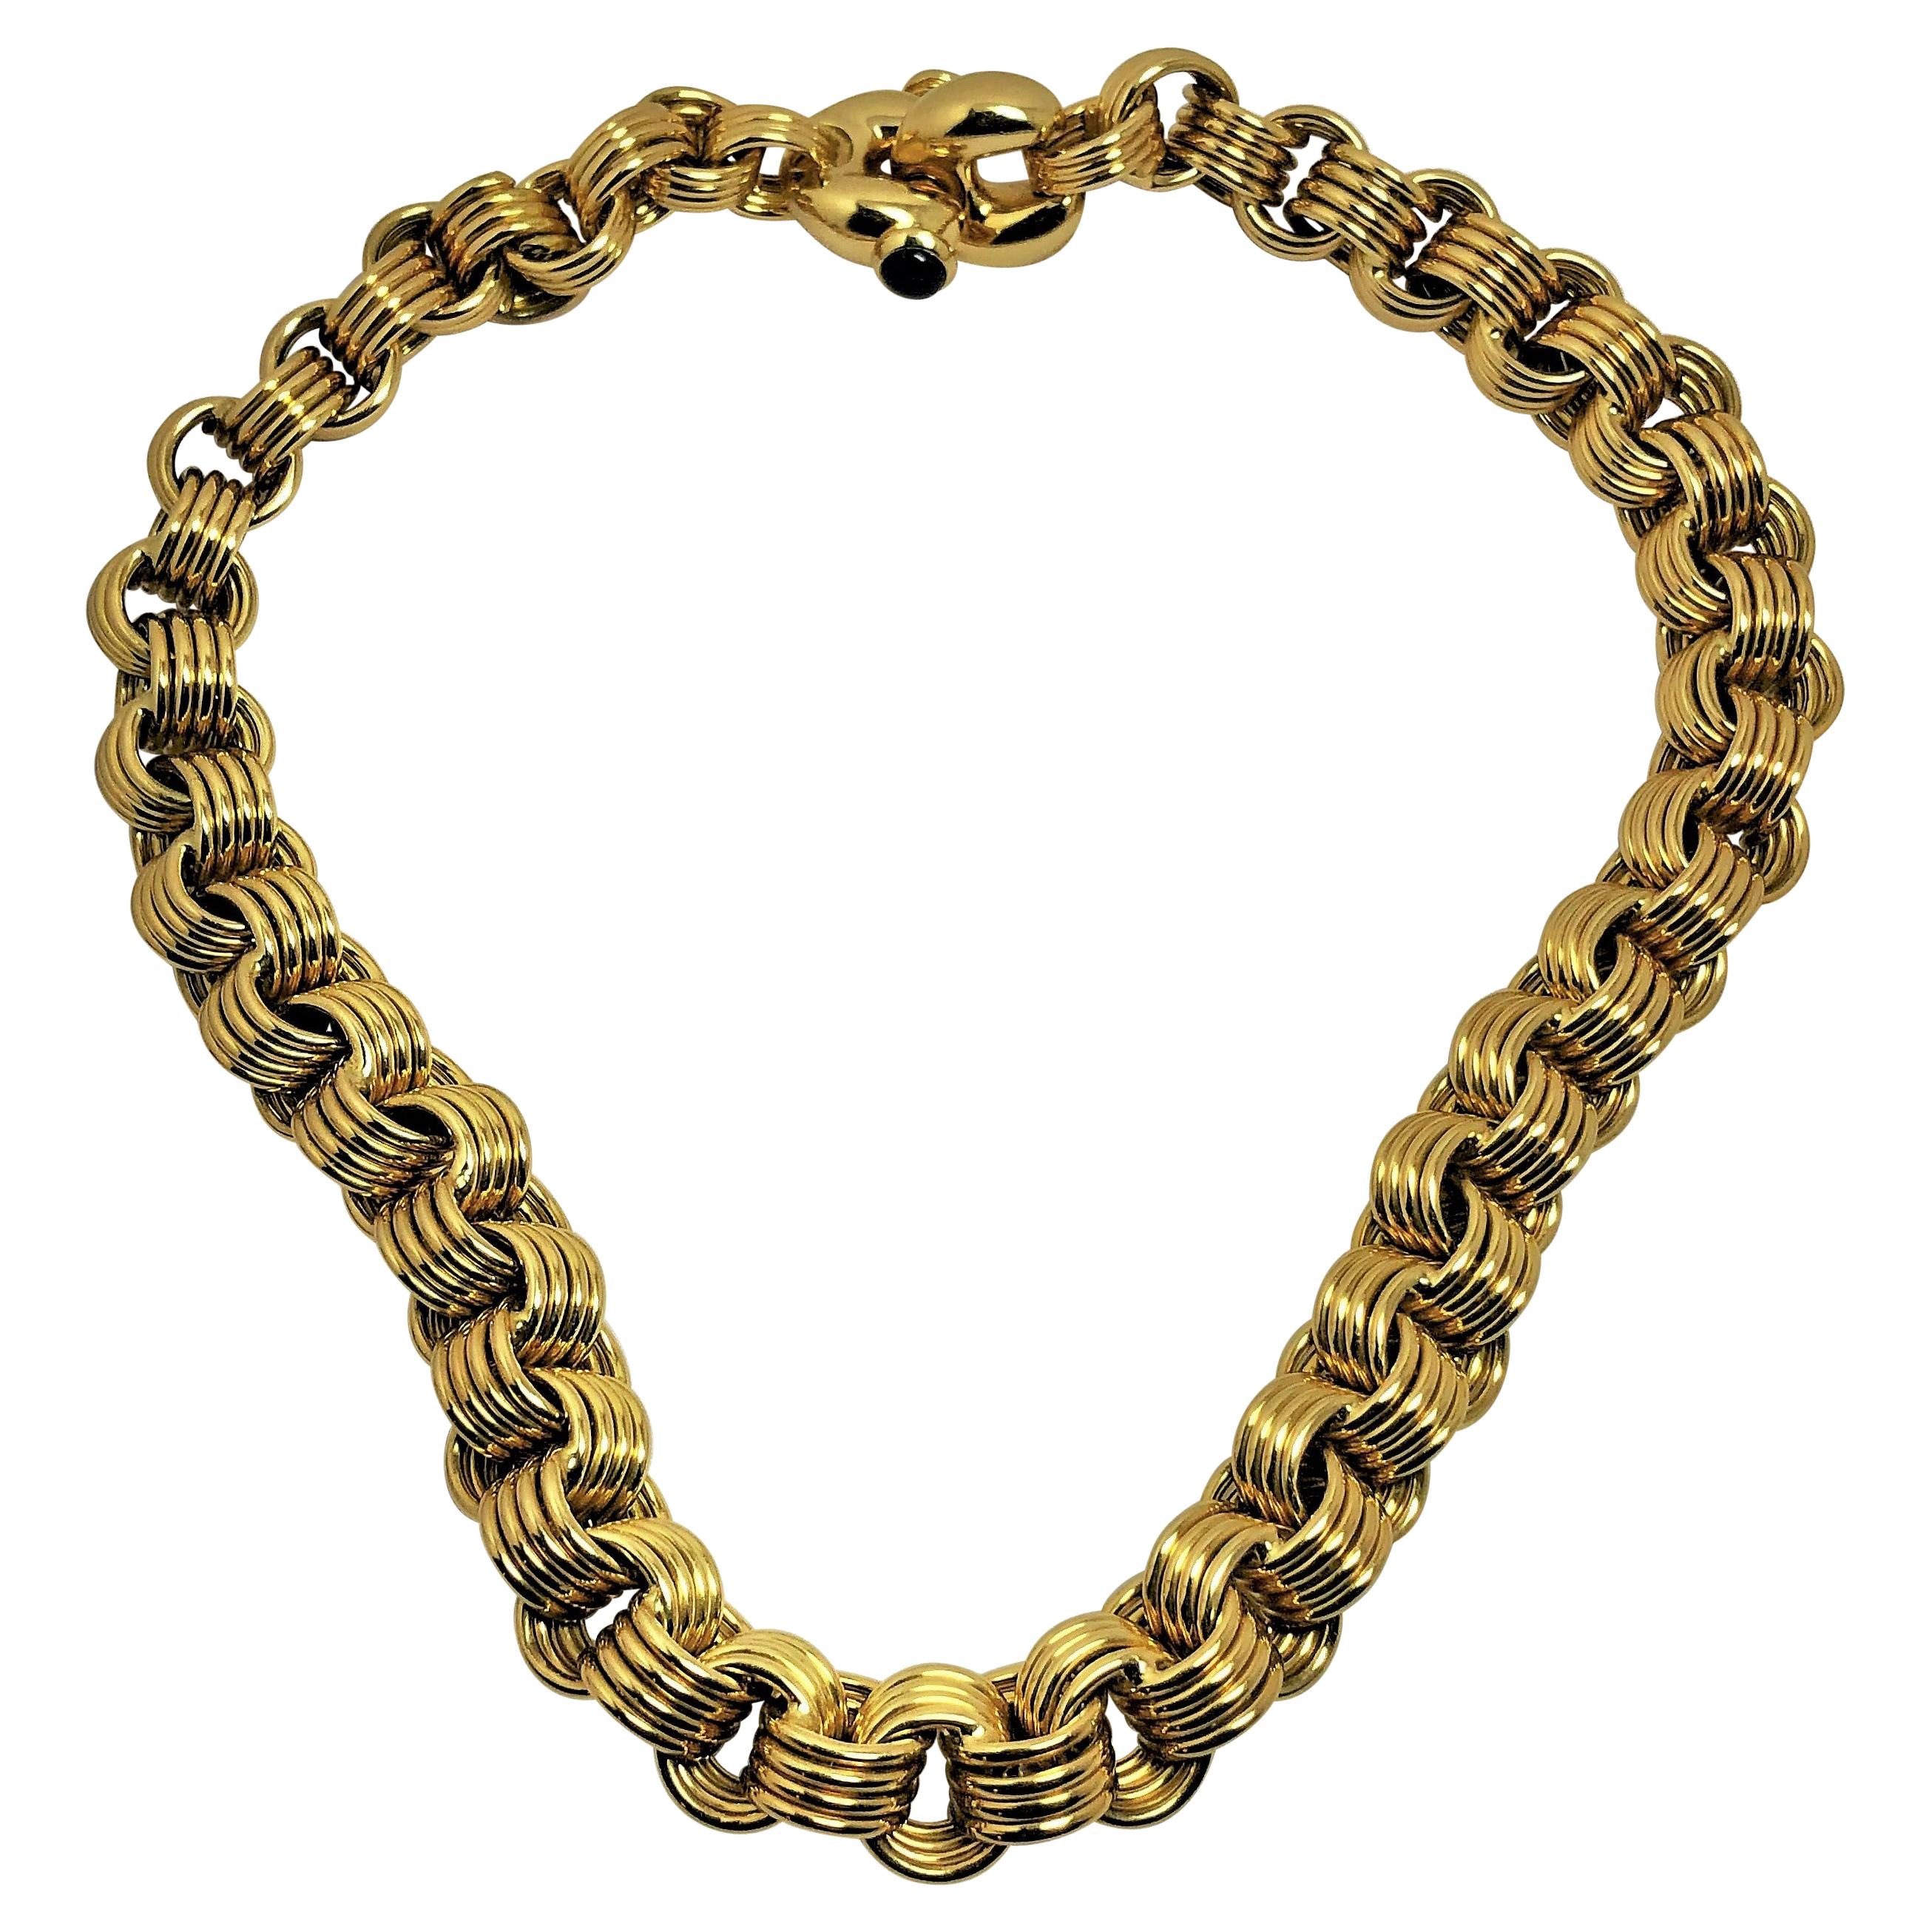 Chiampesan 18k Gold Four Spiral Link Necklace with Cabochon Sapphires on Clasp